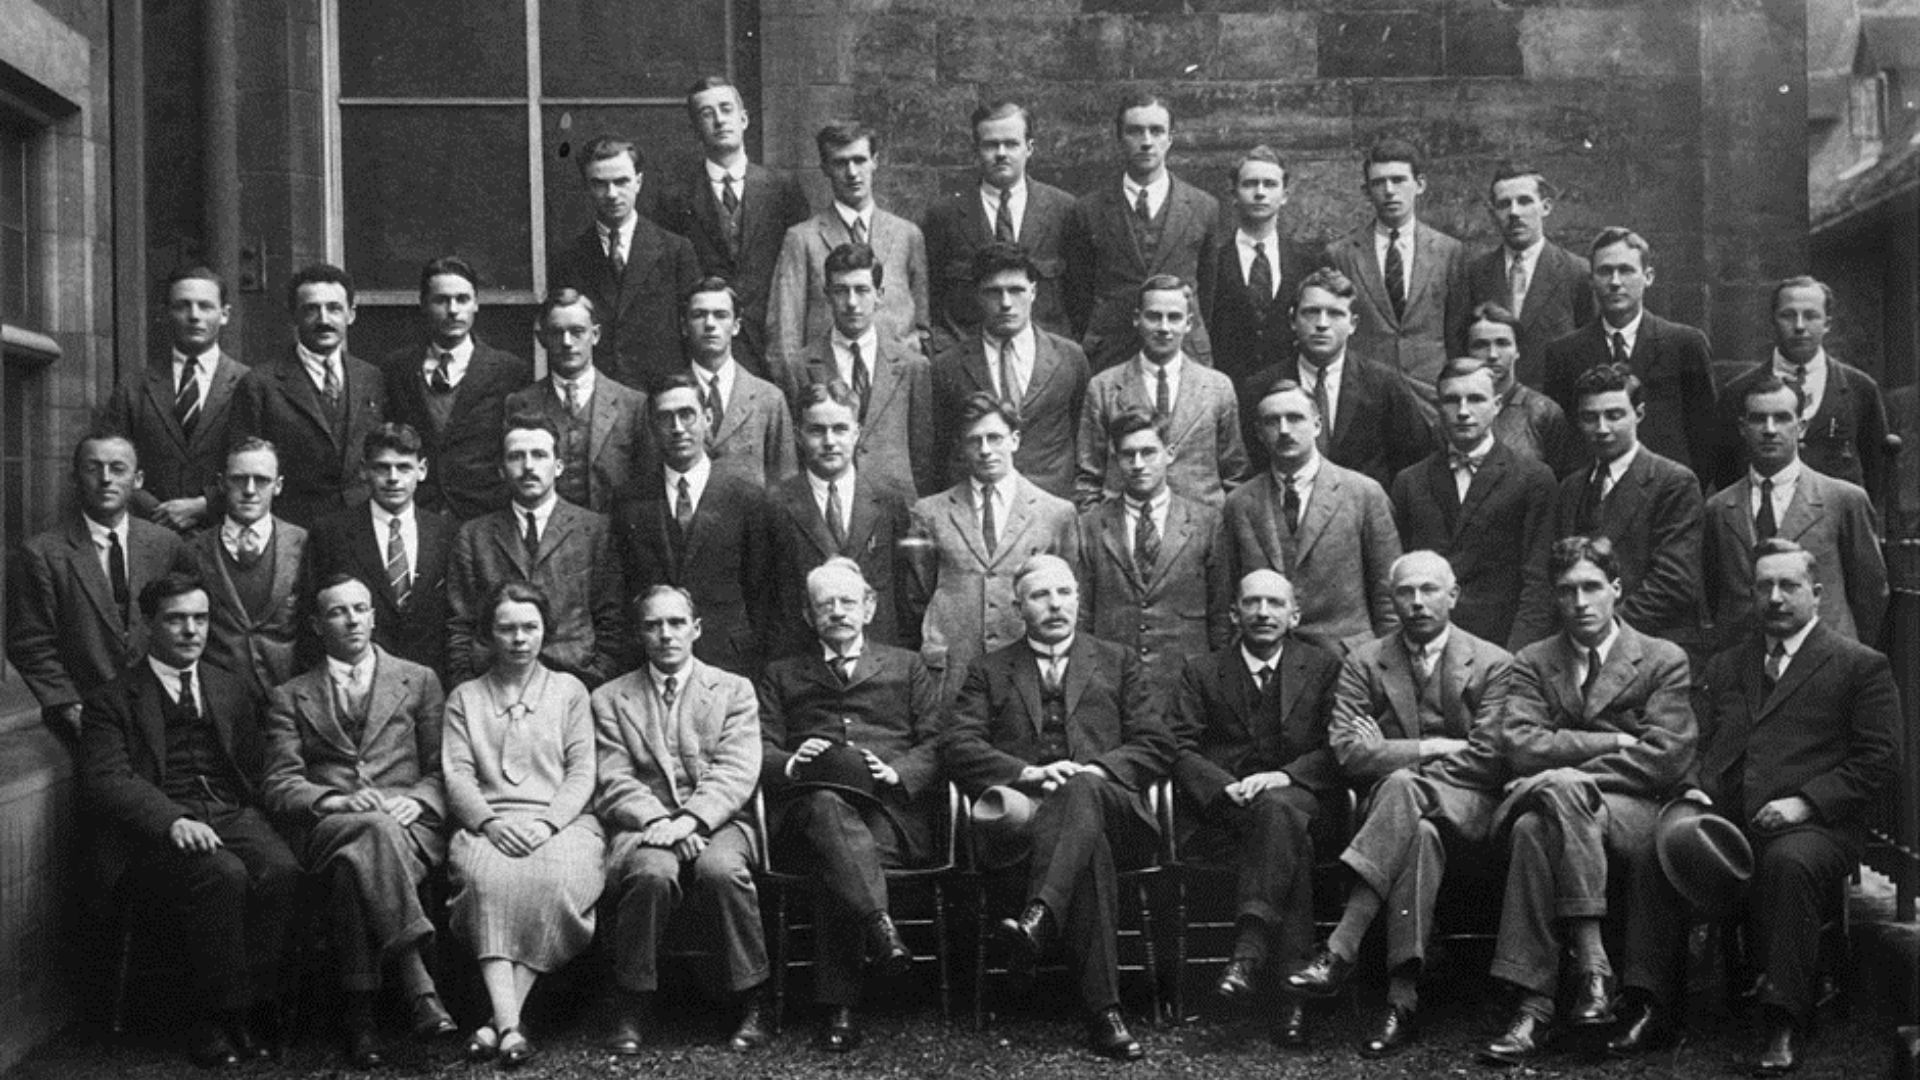 The Cavendish staff-Graduate student annual photograph from 1926